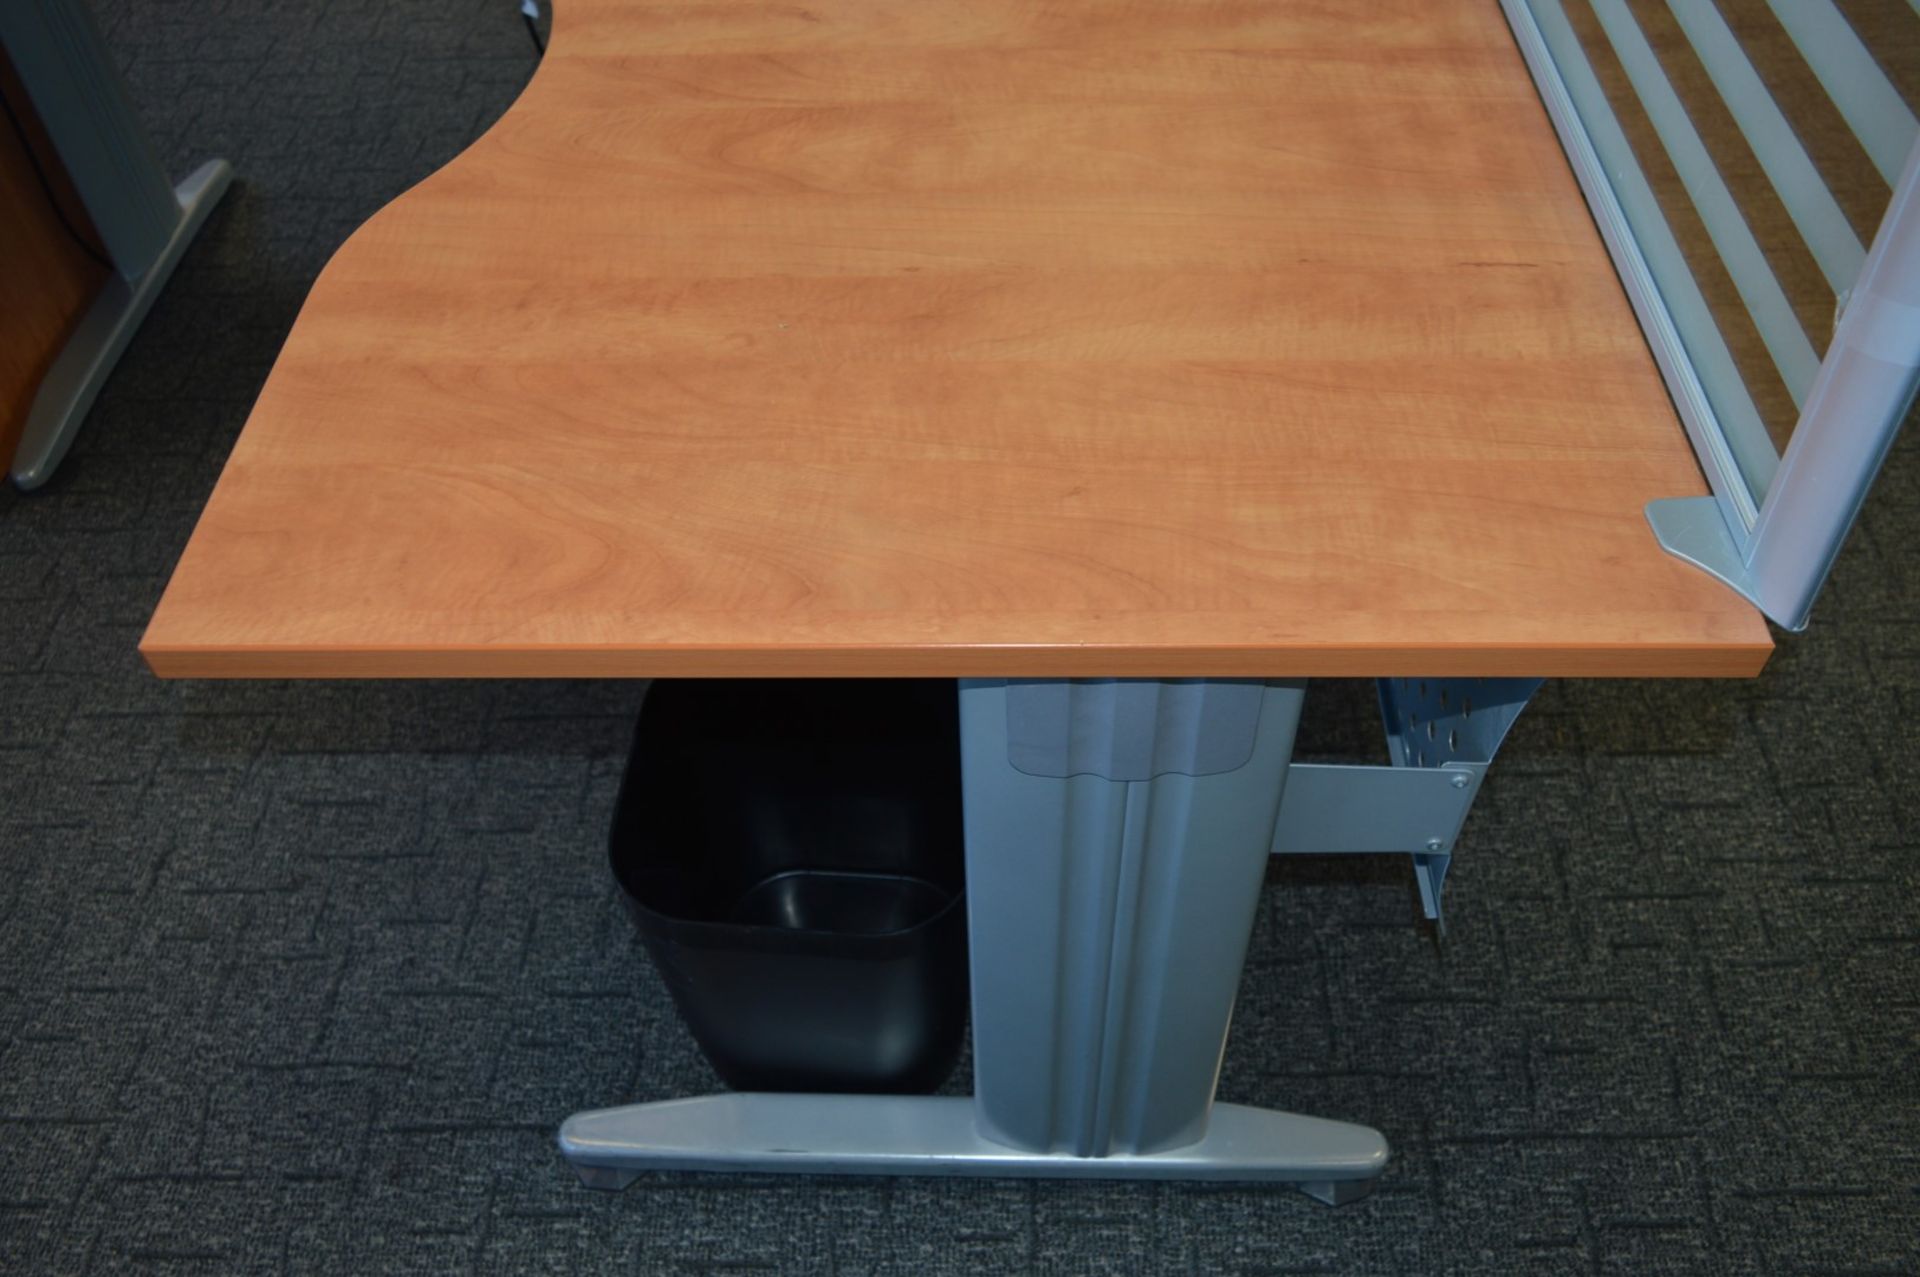 4 x Ergonomical Corner Office Desks With a Beech Finish, Cantilever Grey Coated Base, Cable Tidy - Image 6 of 19